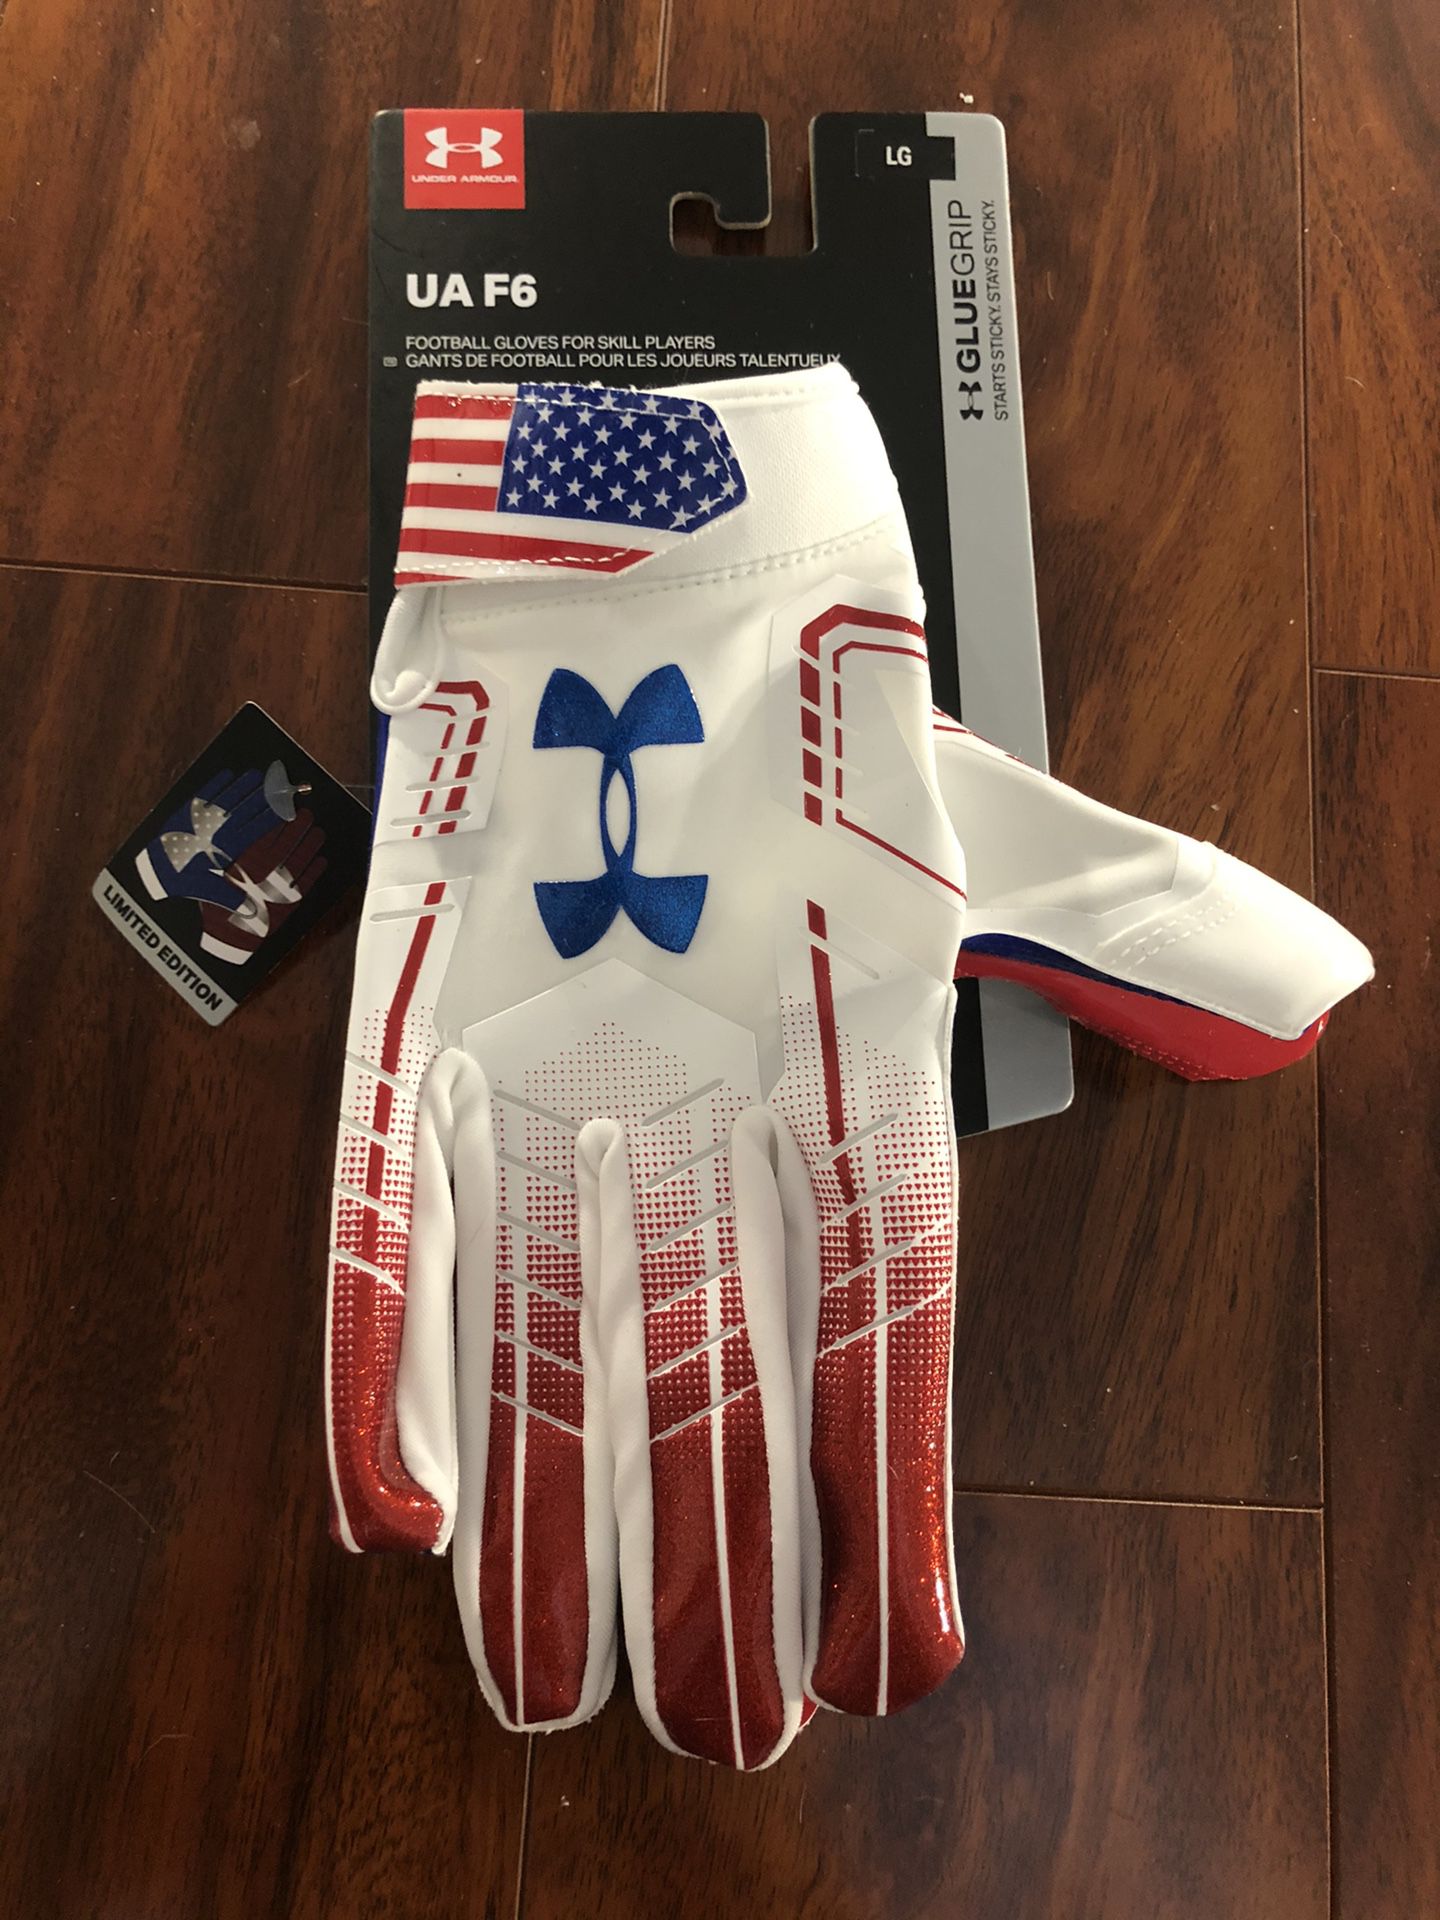 Under Armour F6 Glue Grip Receiver Football Gloves Limited Edition USA Flag Patriot LARGE